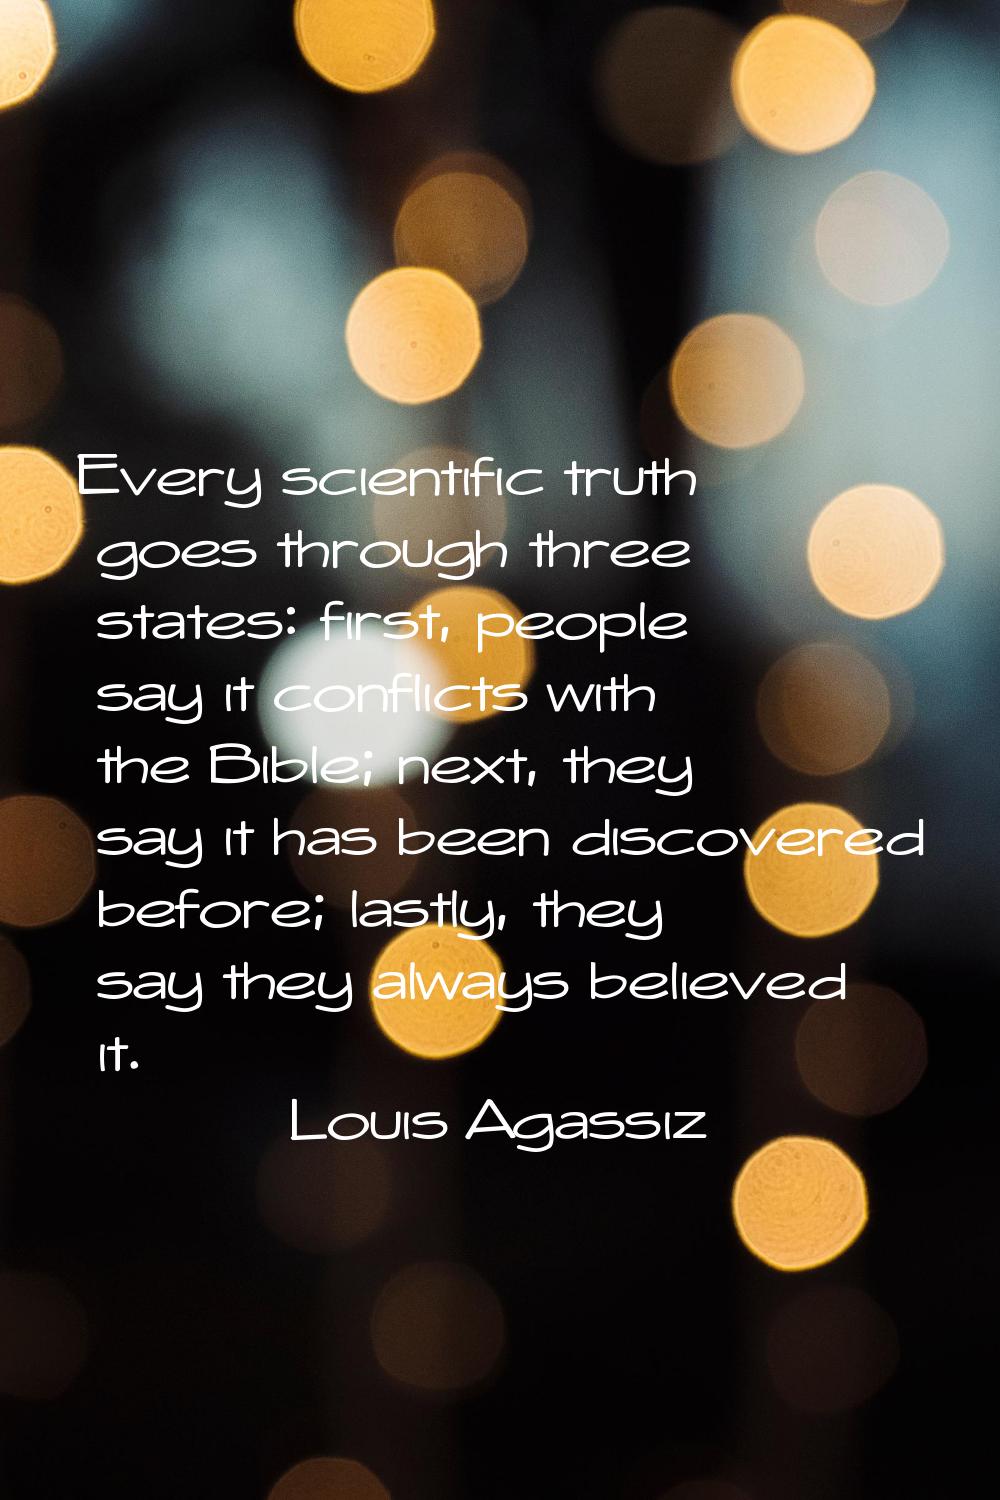 Every scientific truth goes through three states: first, people say it conflicts with the Bible; ne